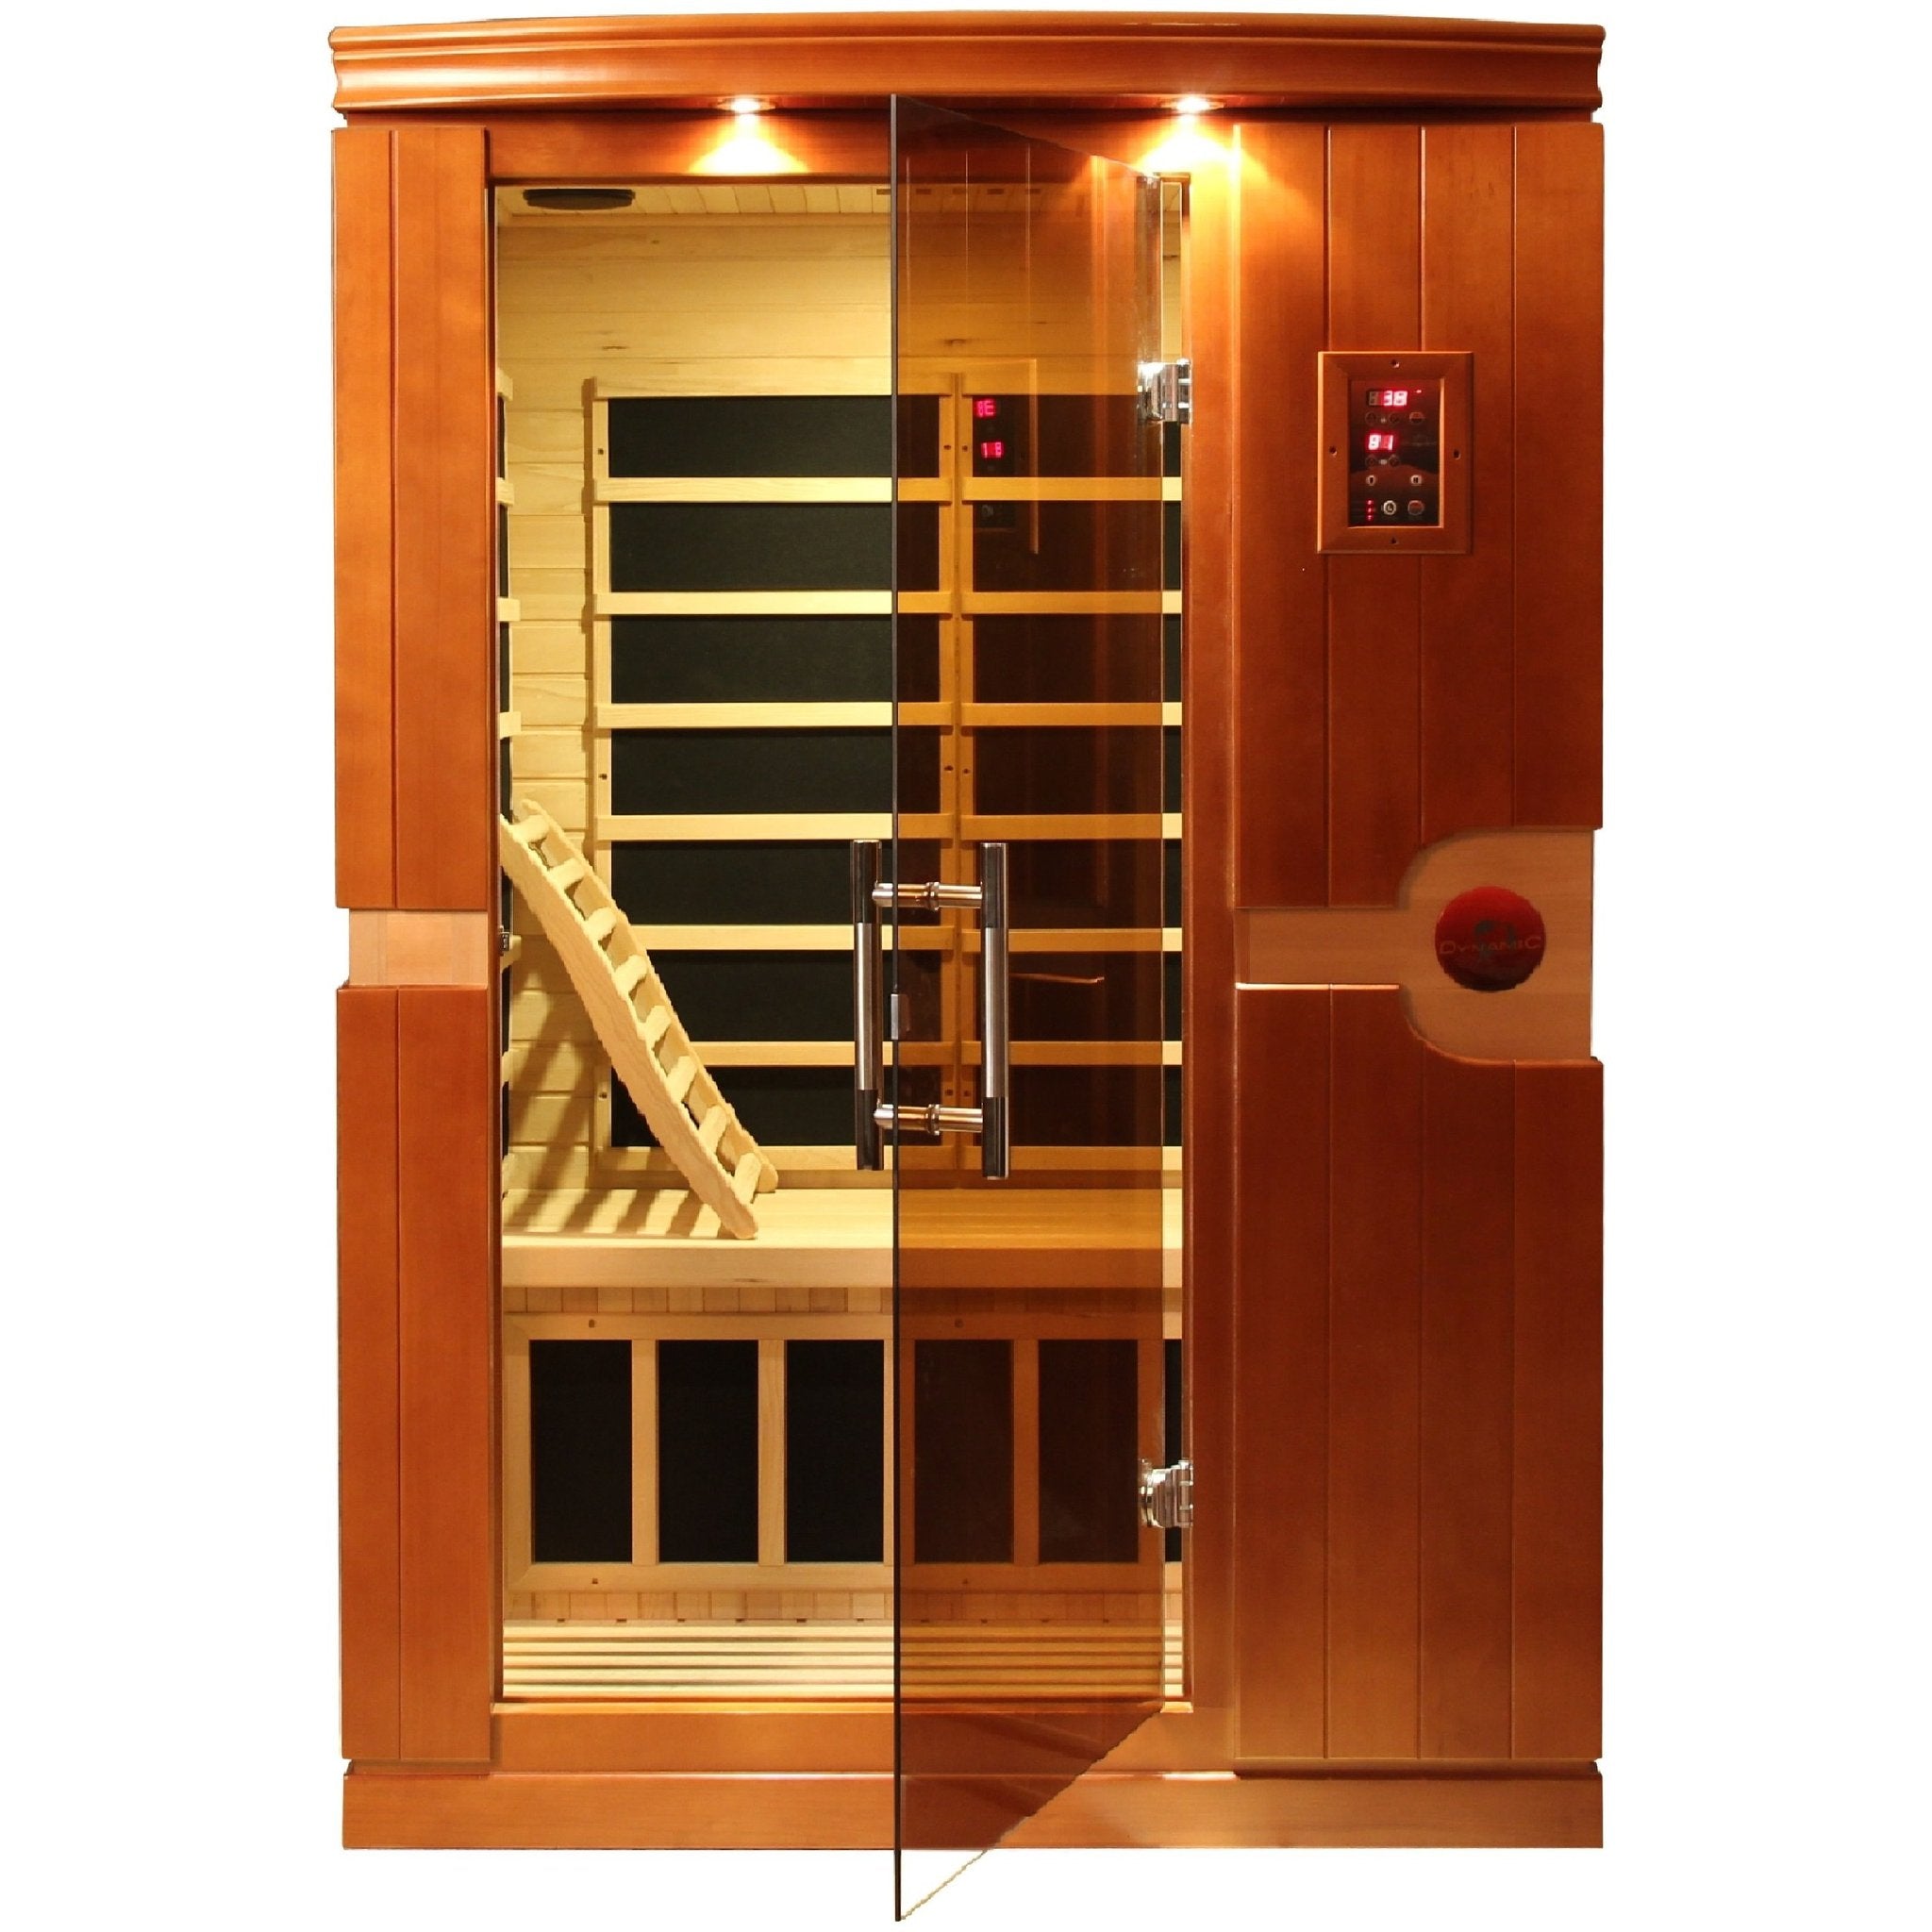 Venice 2 Person Low EMF Infrared Sauna - Promo Code "calmspas30" for $30 Off - IN STOCK